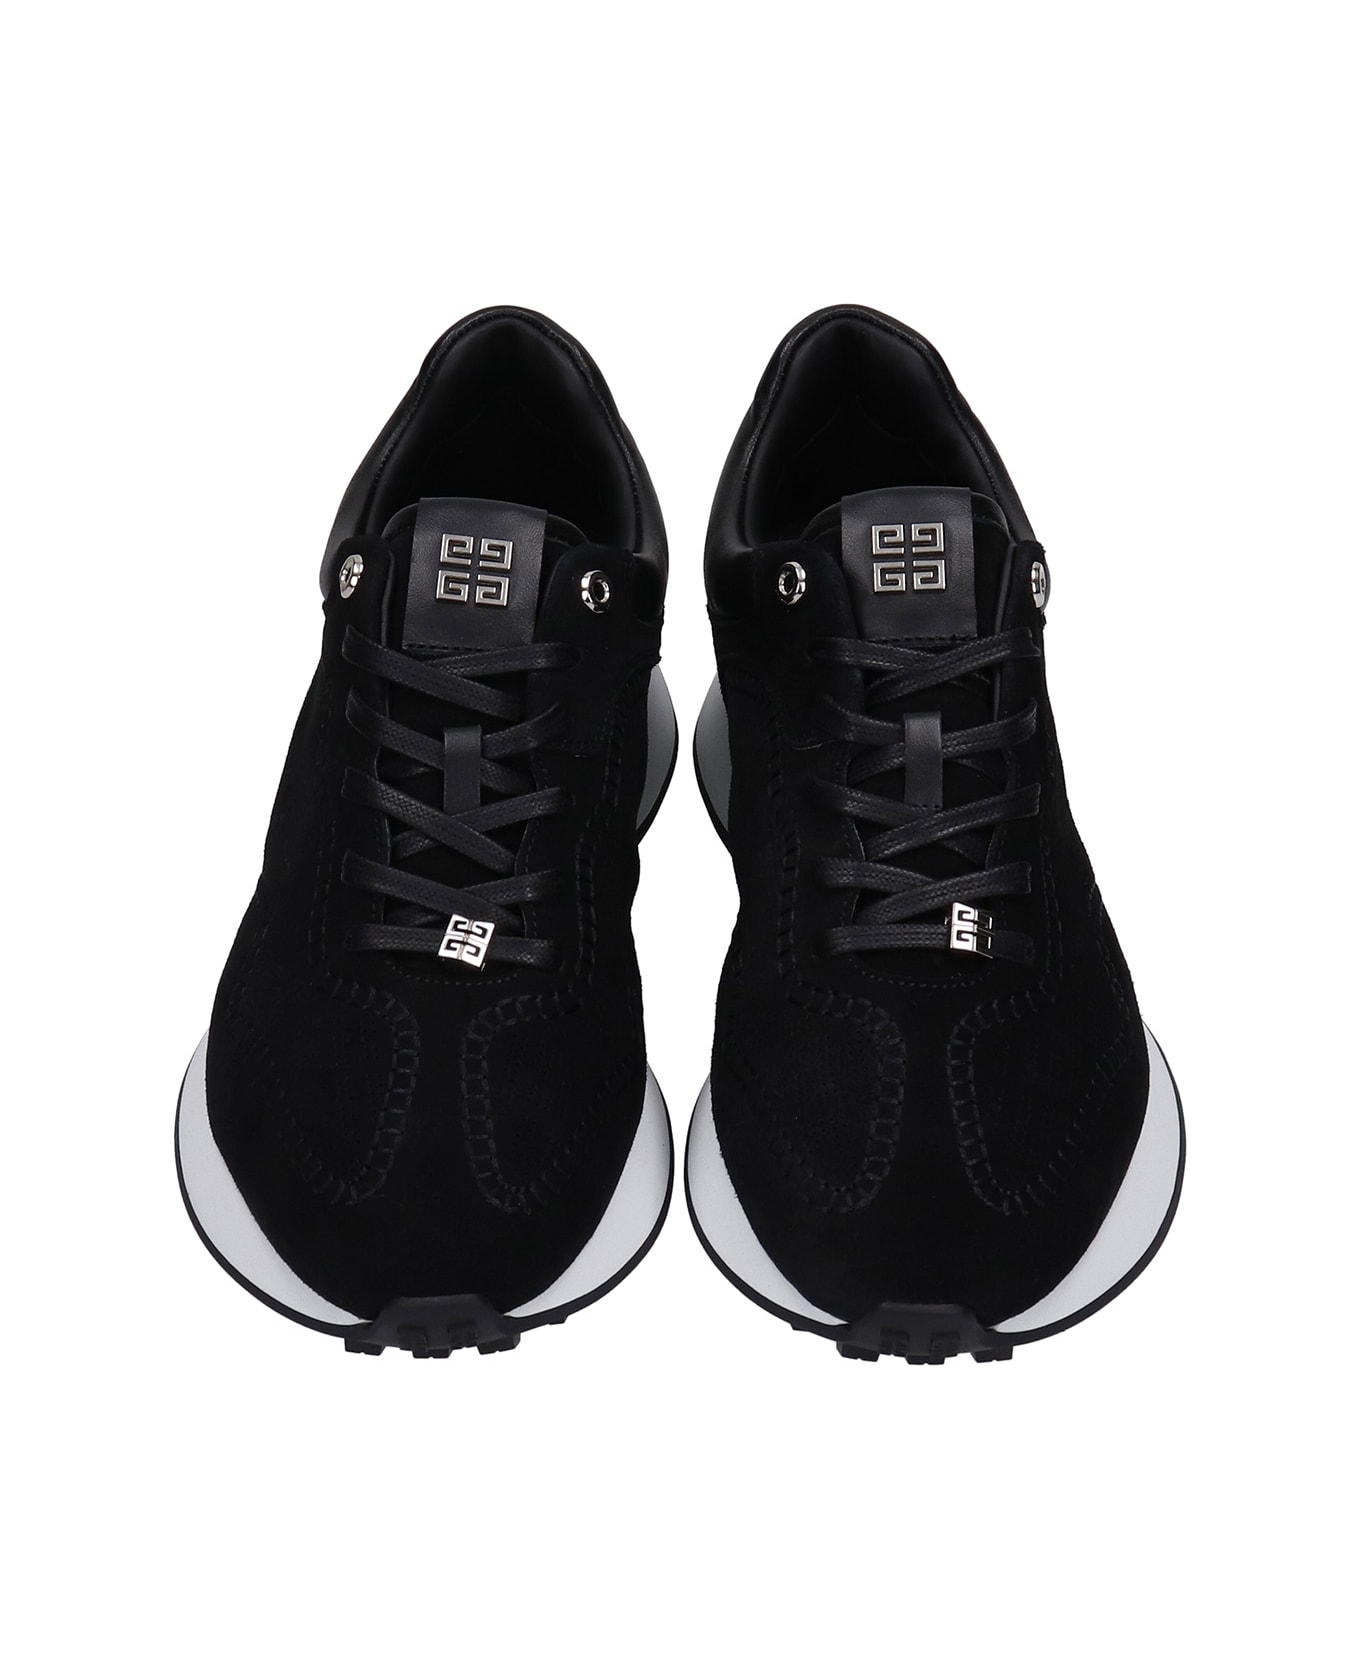 Givenchy Giv Runner Sneakers In Black Leather - black